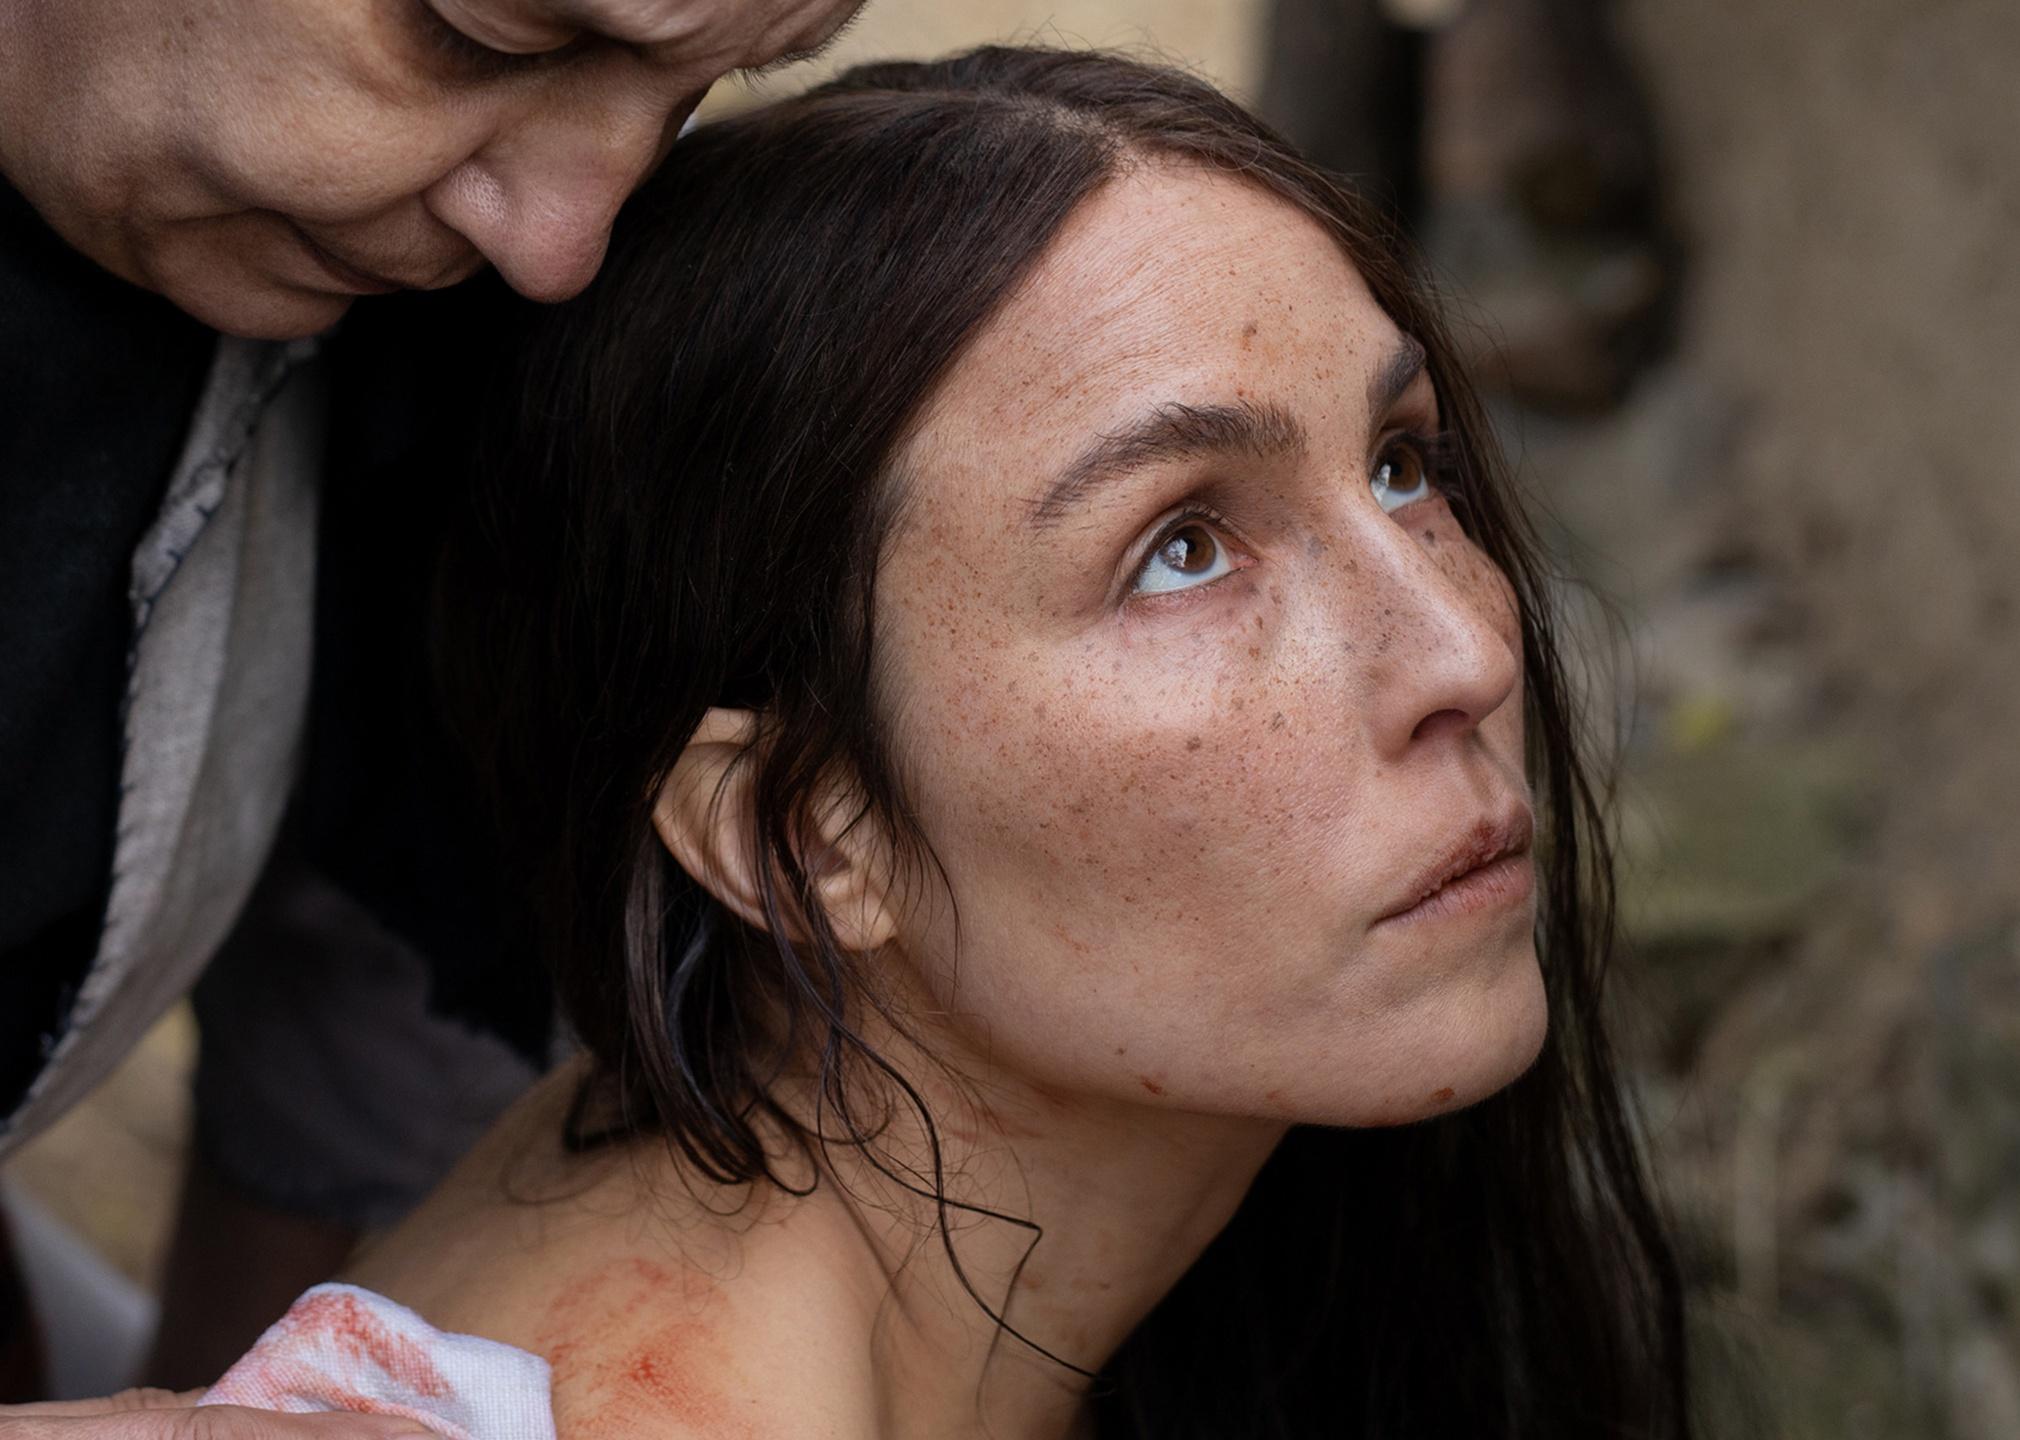 A woman with dark hair and freckles looks up while an older woman wipes blood off her shoulder